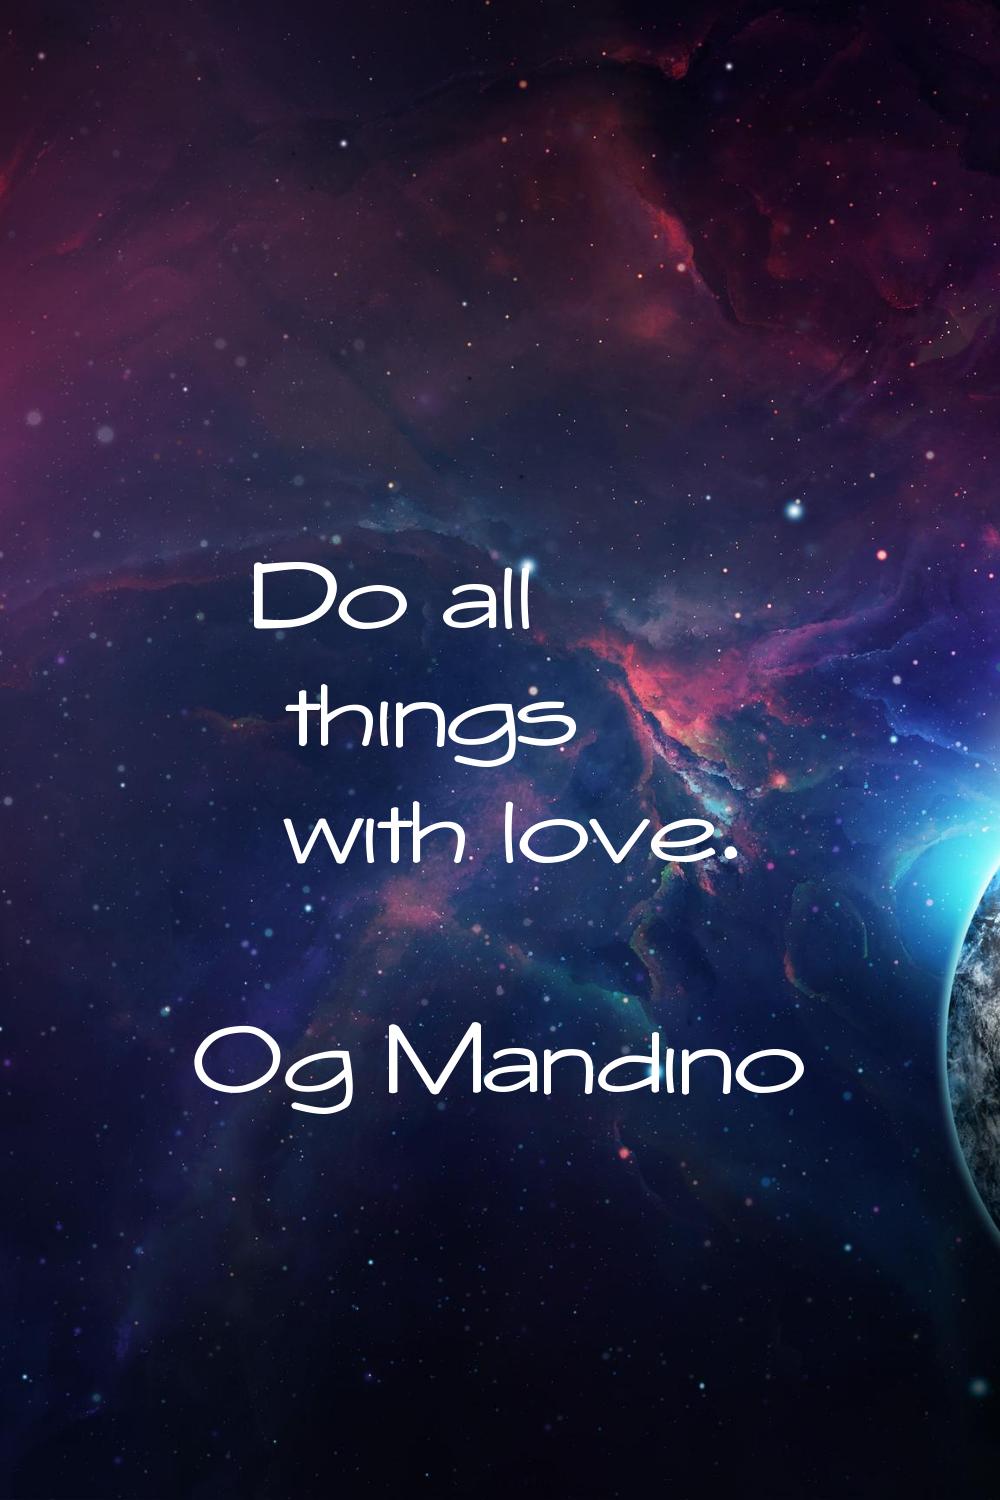 Do all things with love.